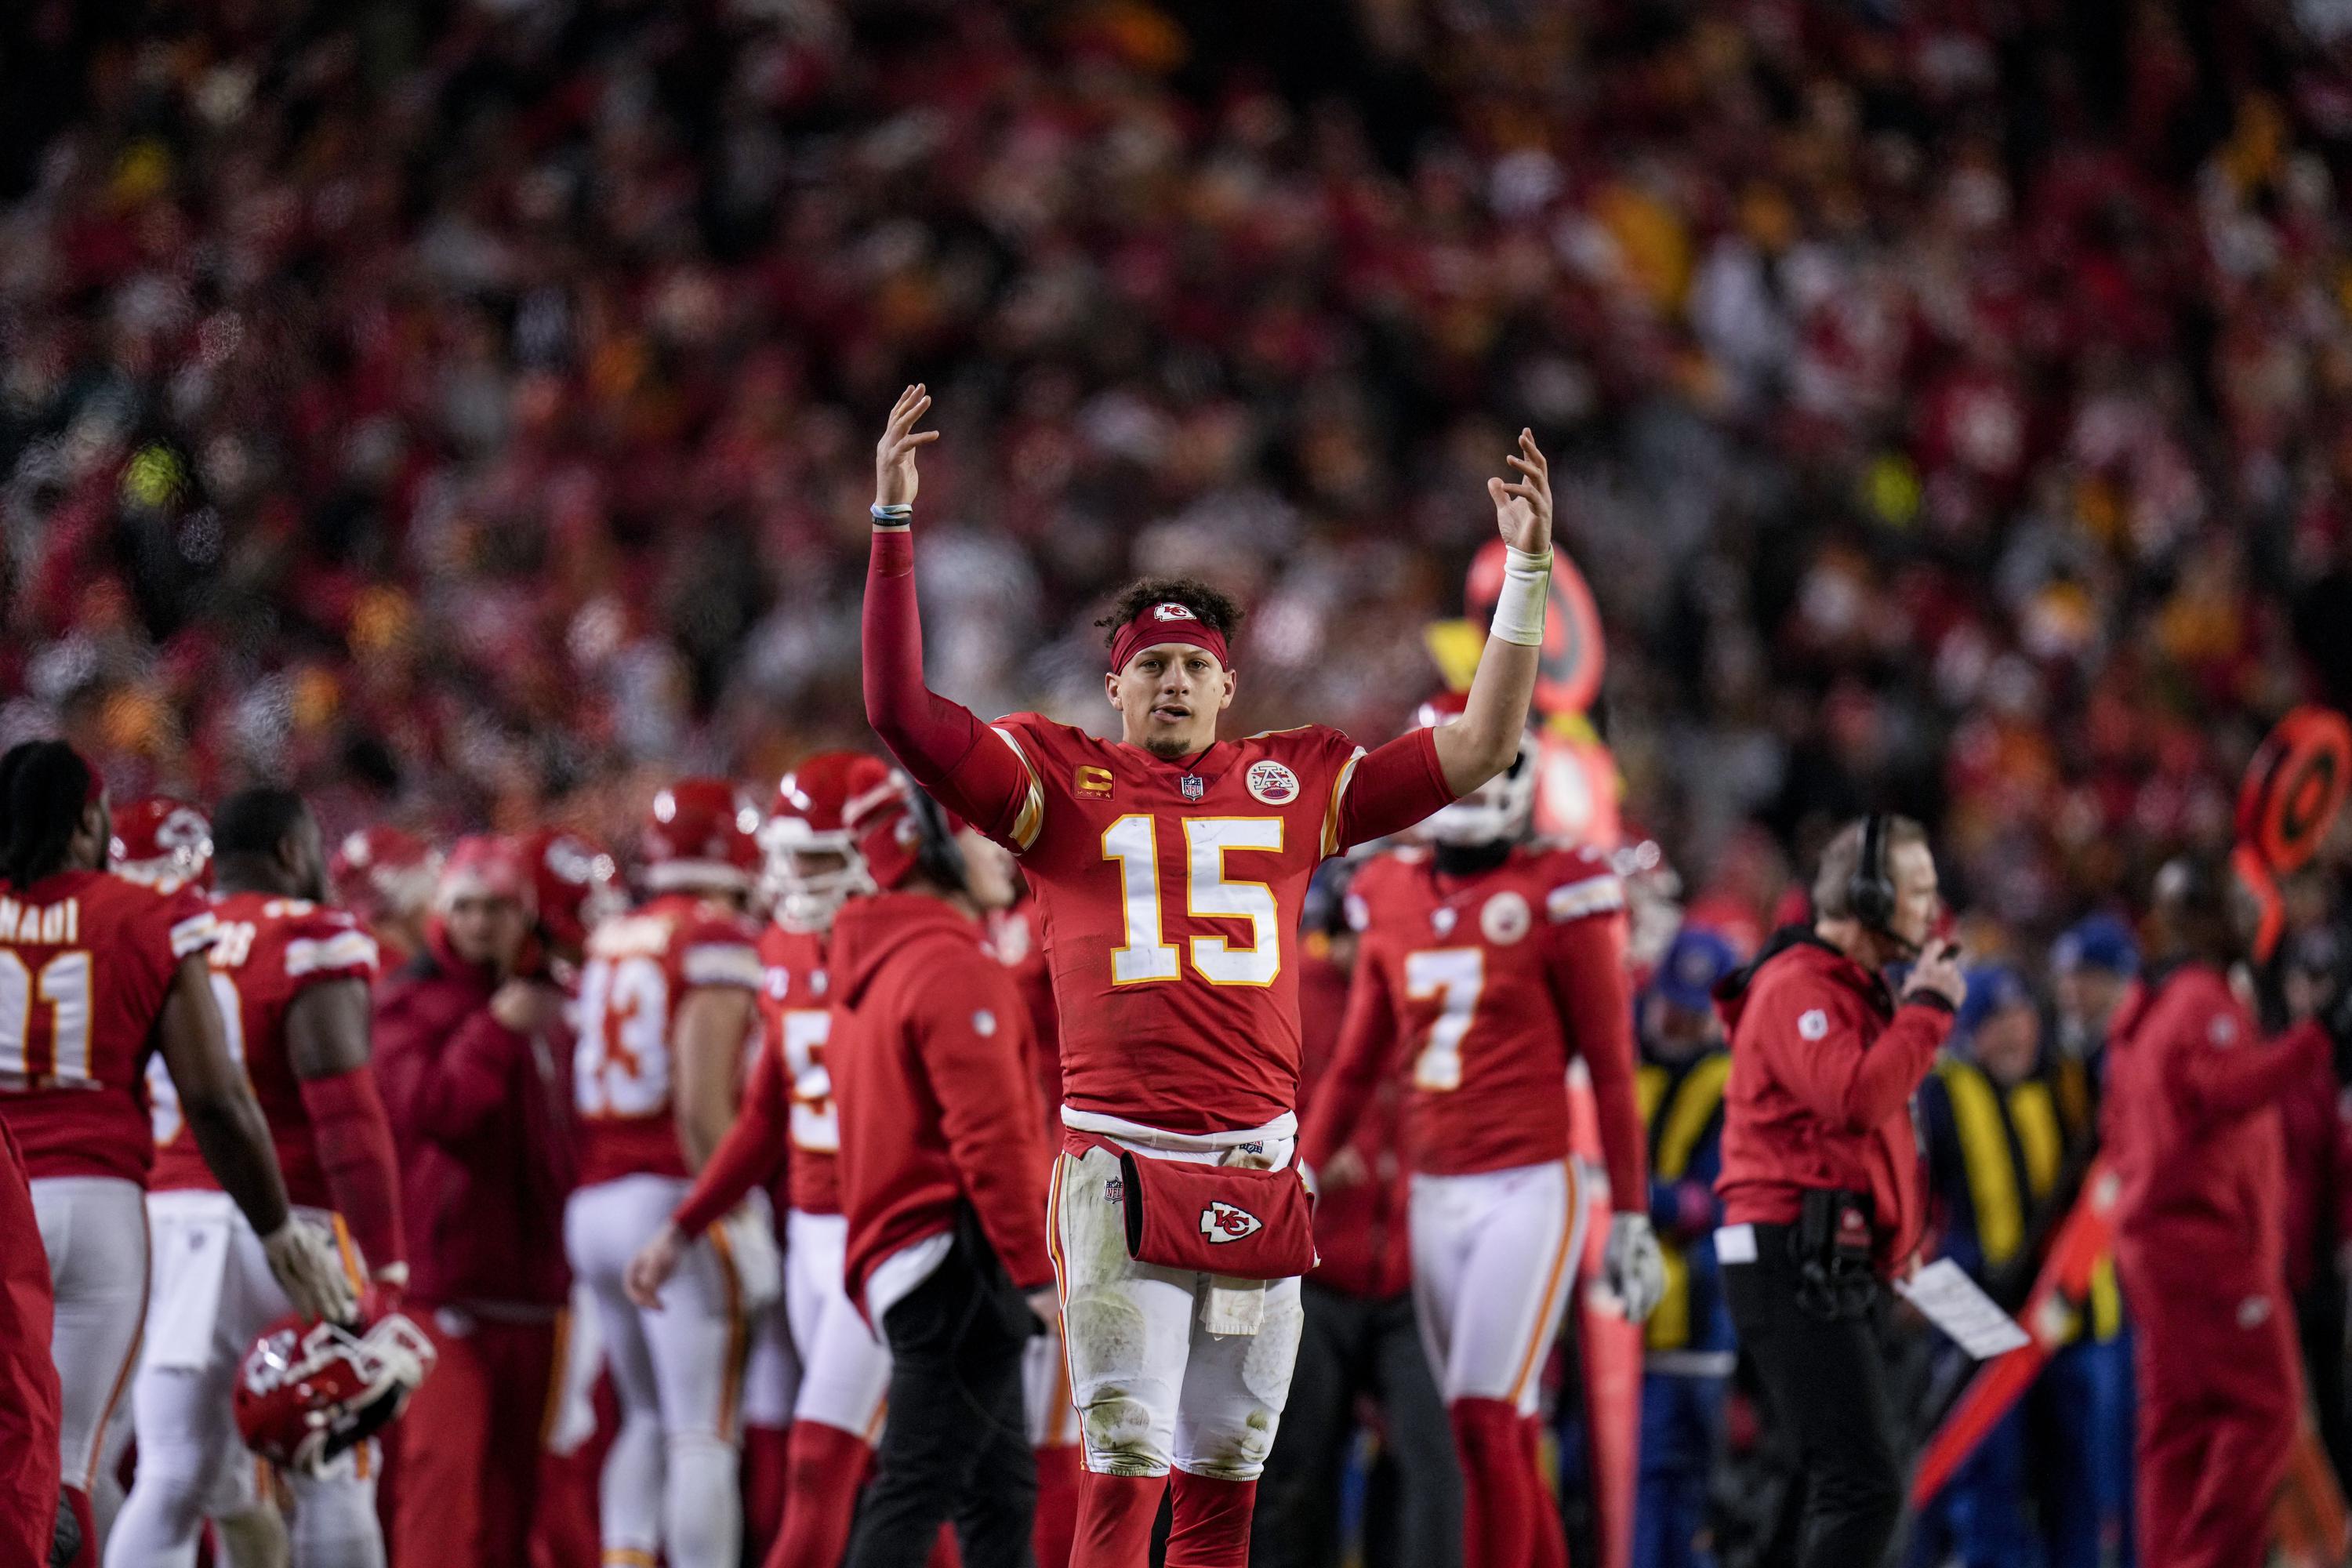 Kansas City Chiefs Super Bowl Wins History, Appearances, and More